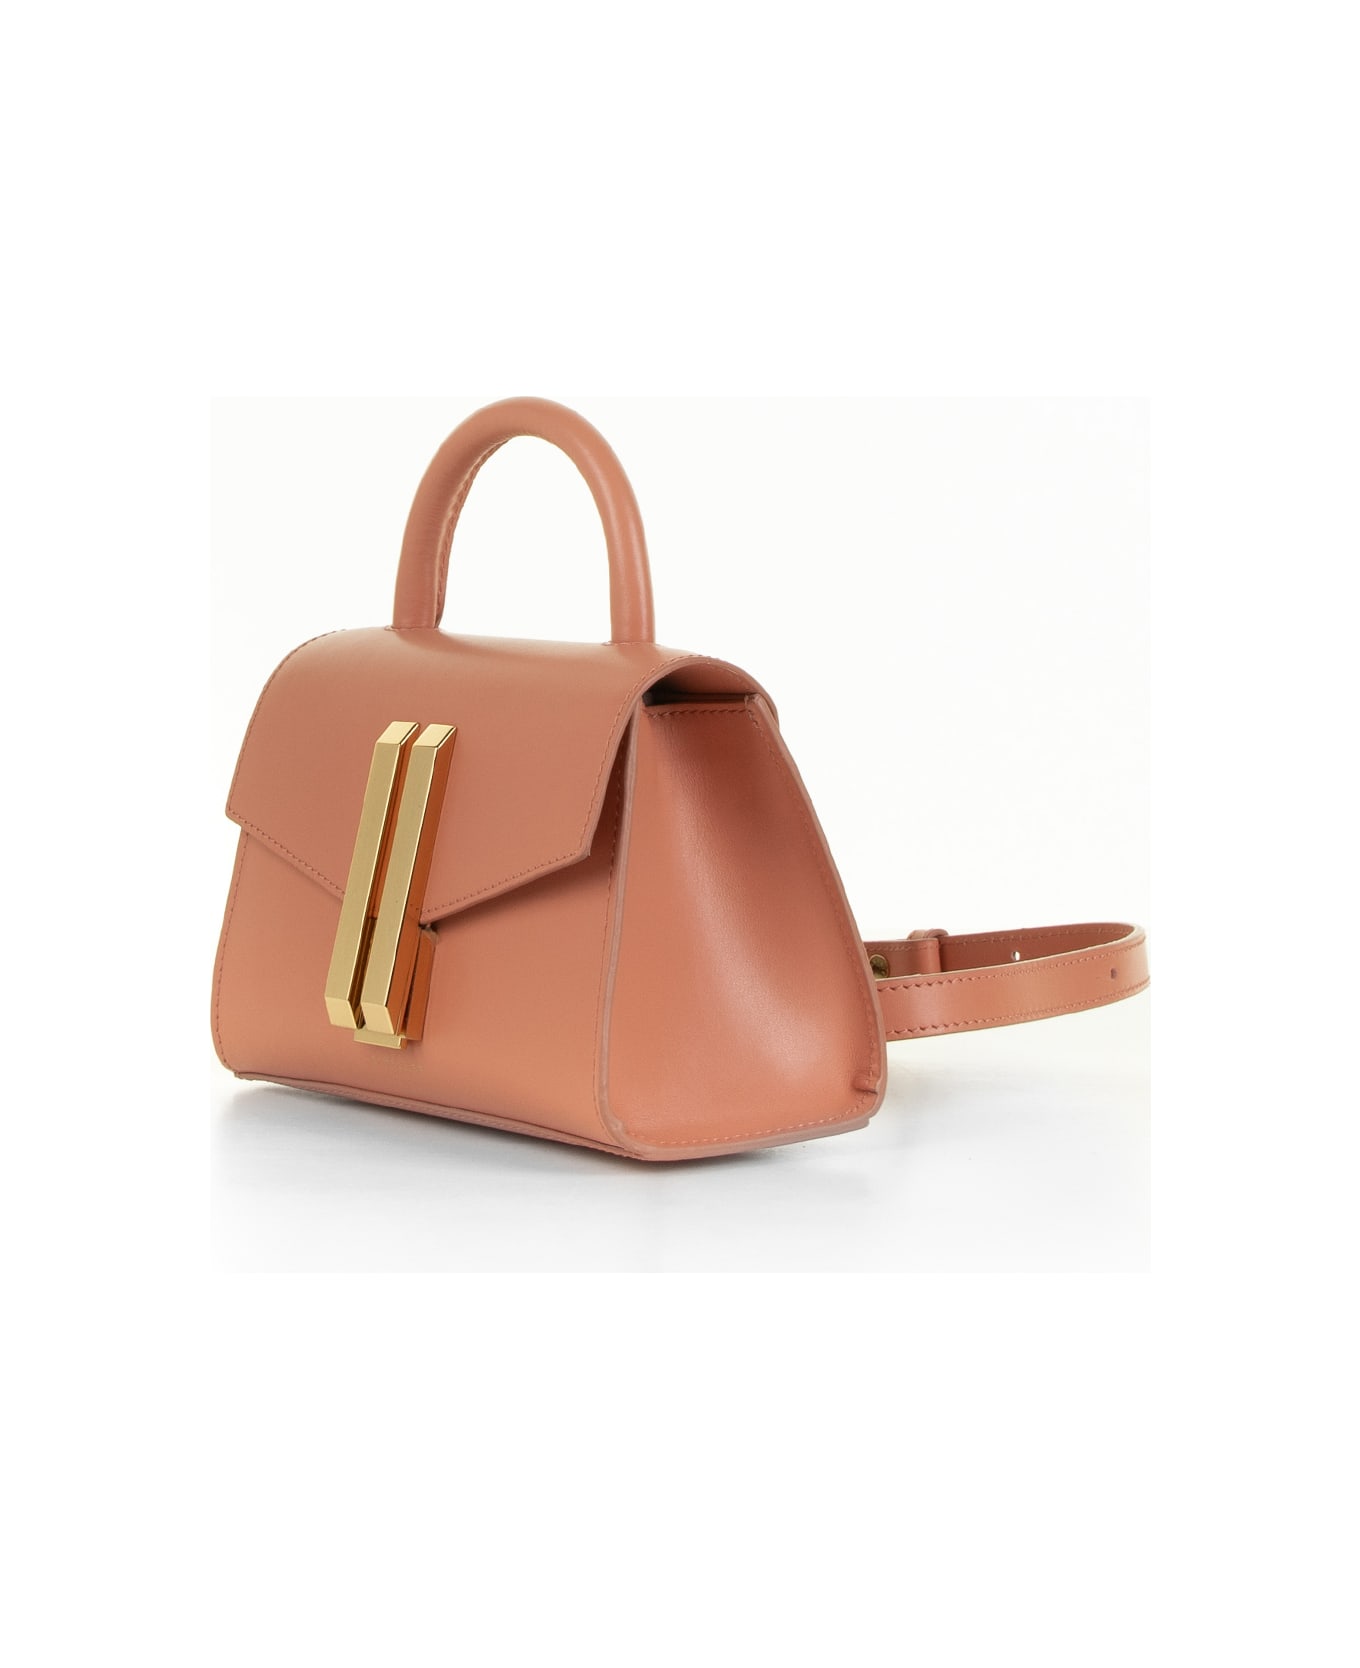 Demellier Montreal Nano Leather Bag With Shoulder Strap - CORAL